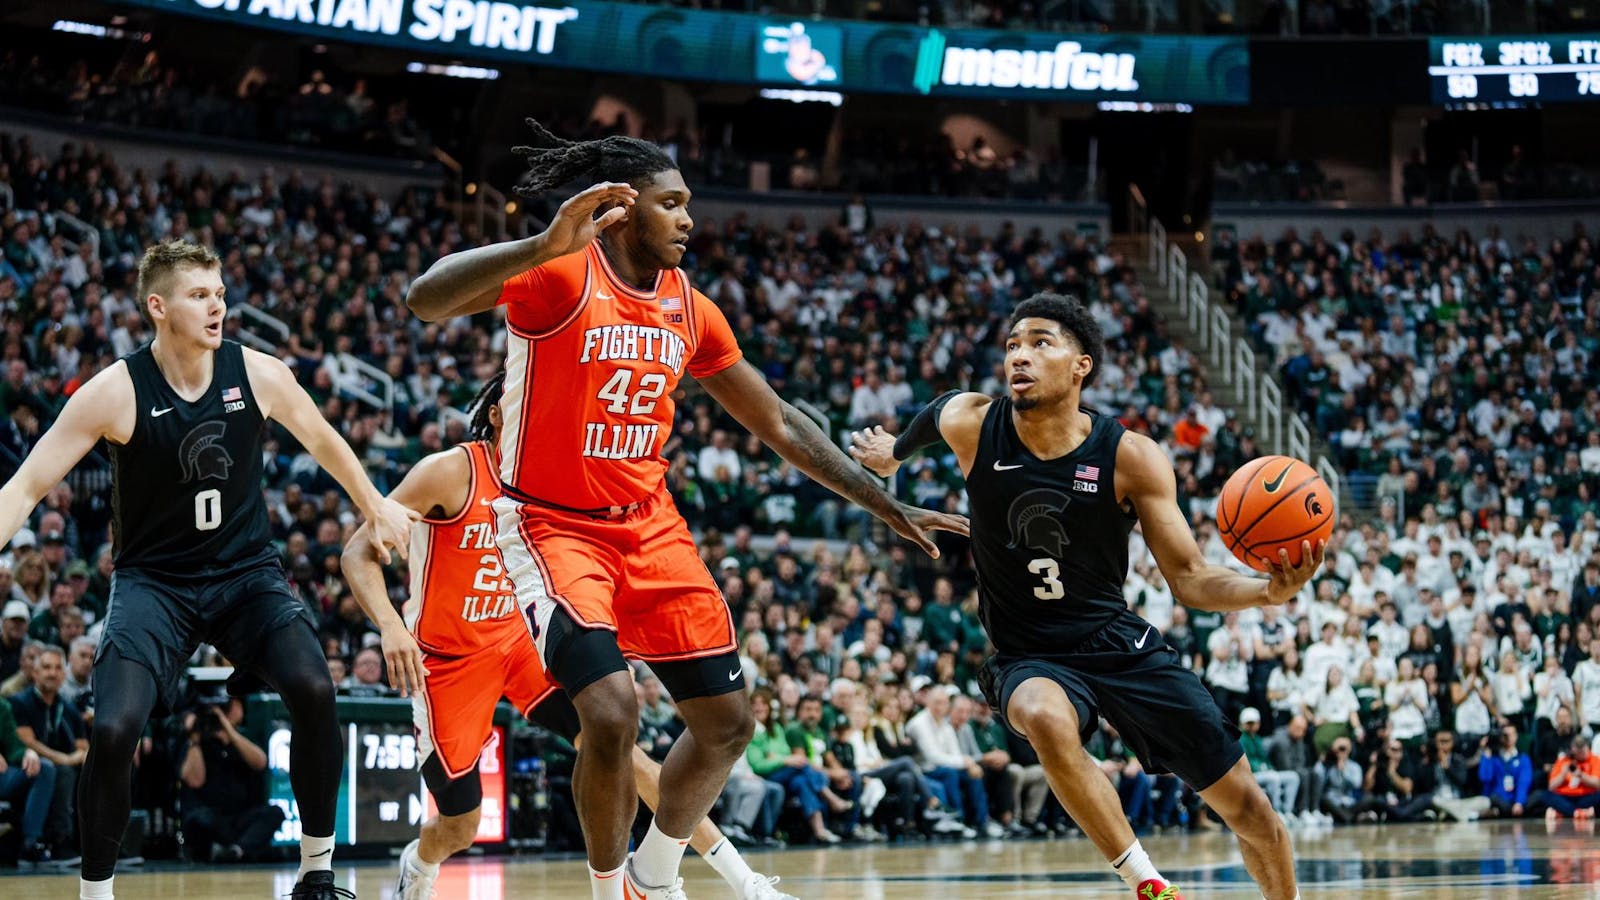 MSU men's basketball downs No. 10 Illinois at home 88-80 – The State News